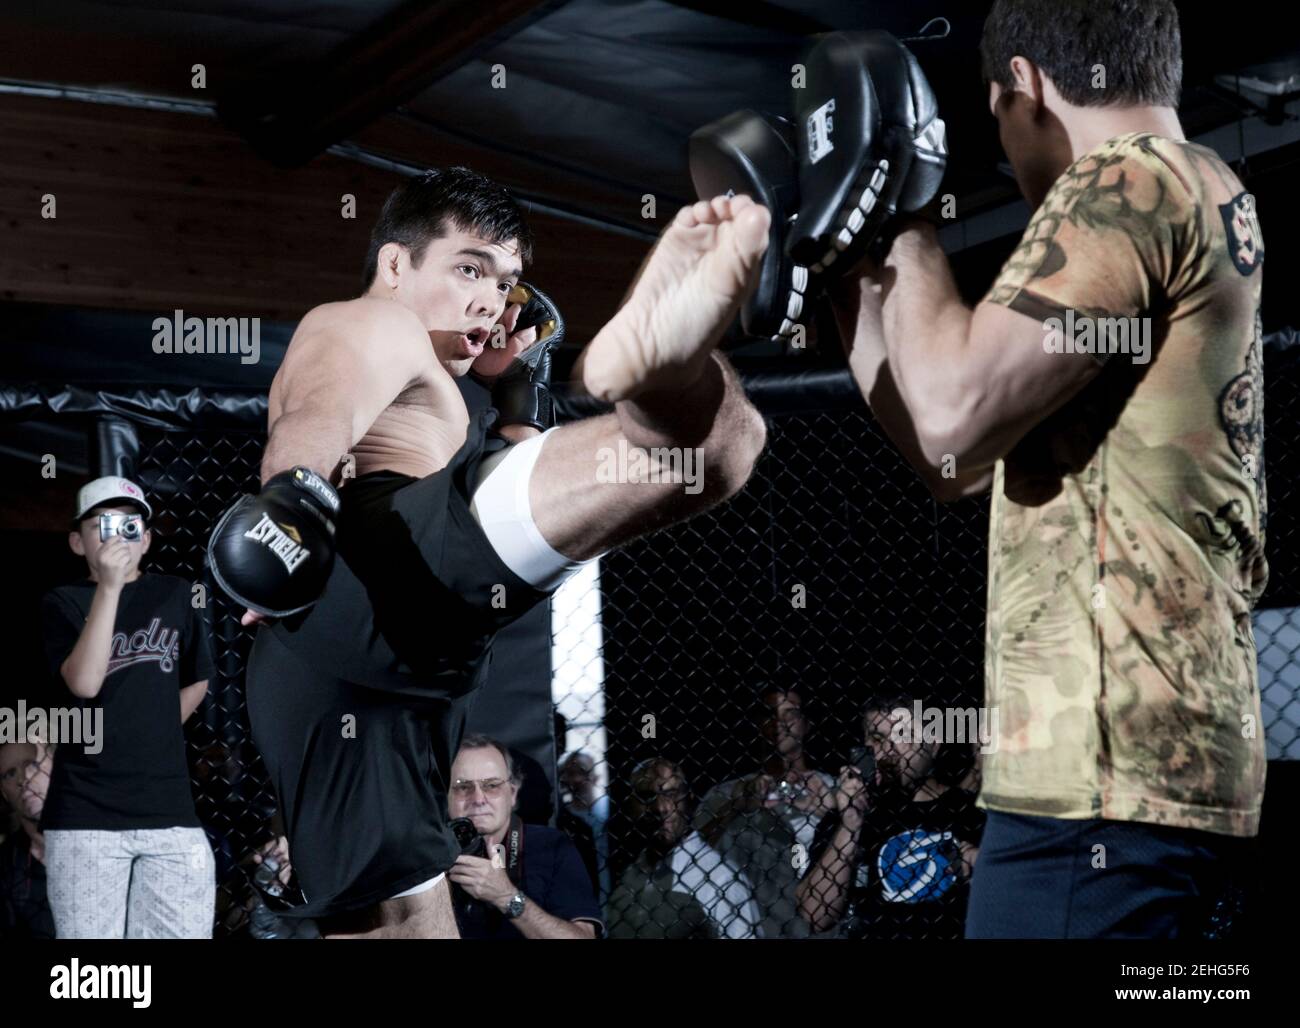 UFC fighter Lyoto Machida, left, during a training session at the Black House gym in Gardena, California on October 20, 2009. Francis Specker Stock Photo